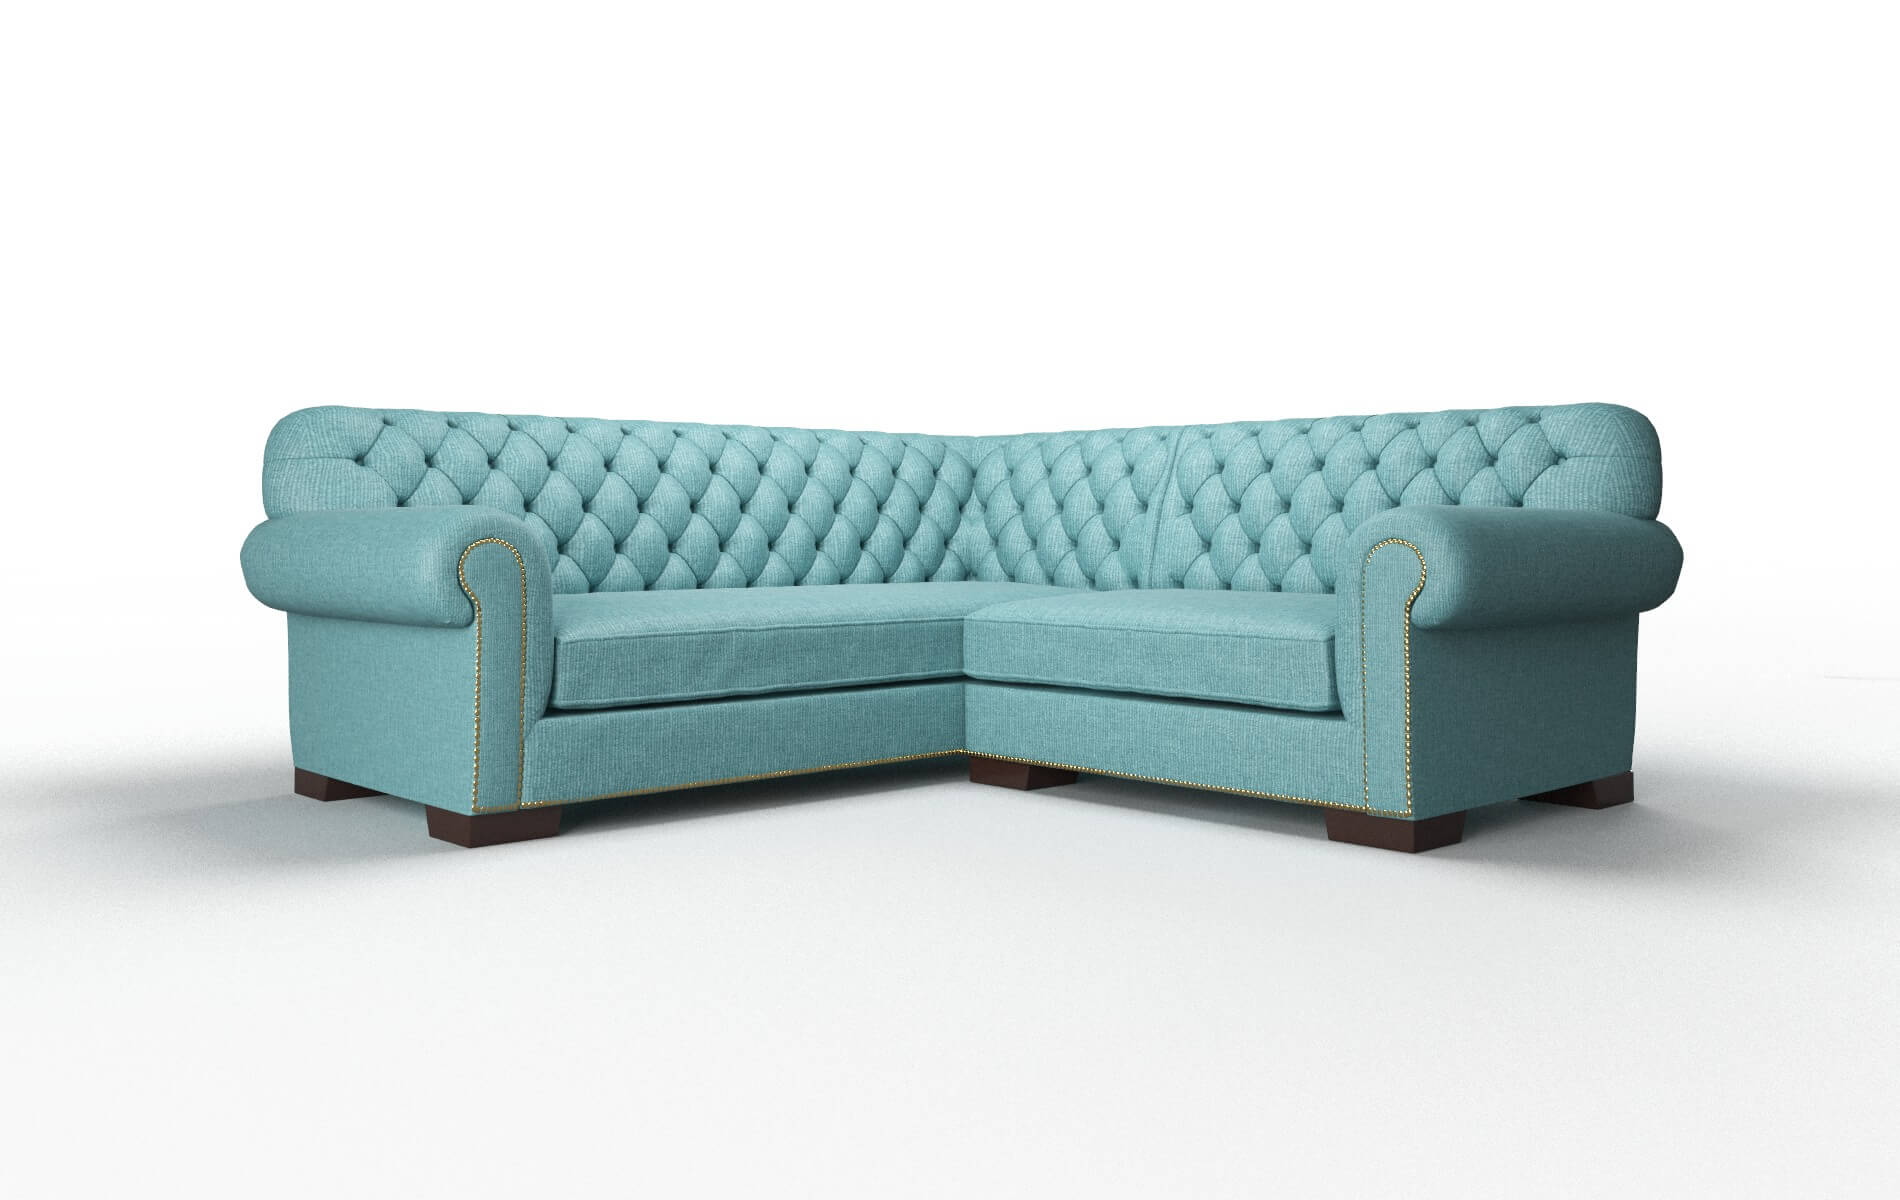 Chester Parker Turquoise chair espresso legs